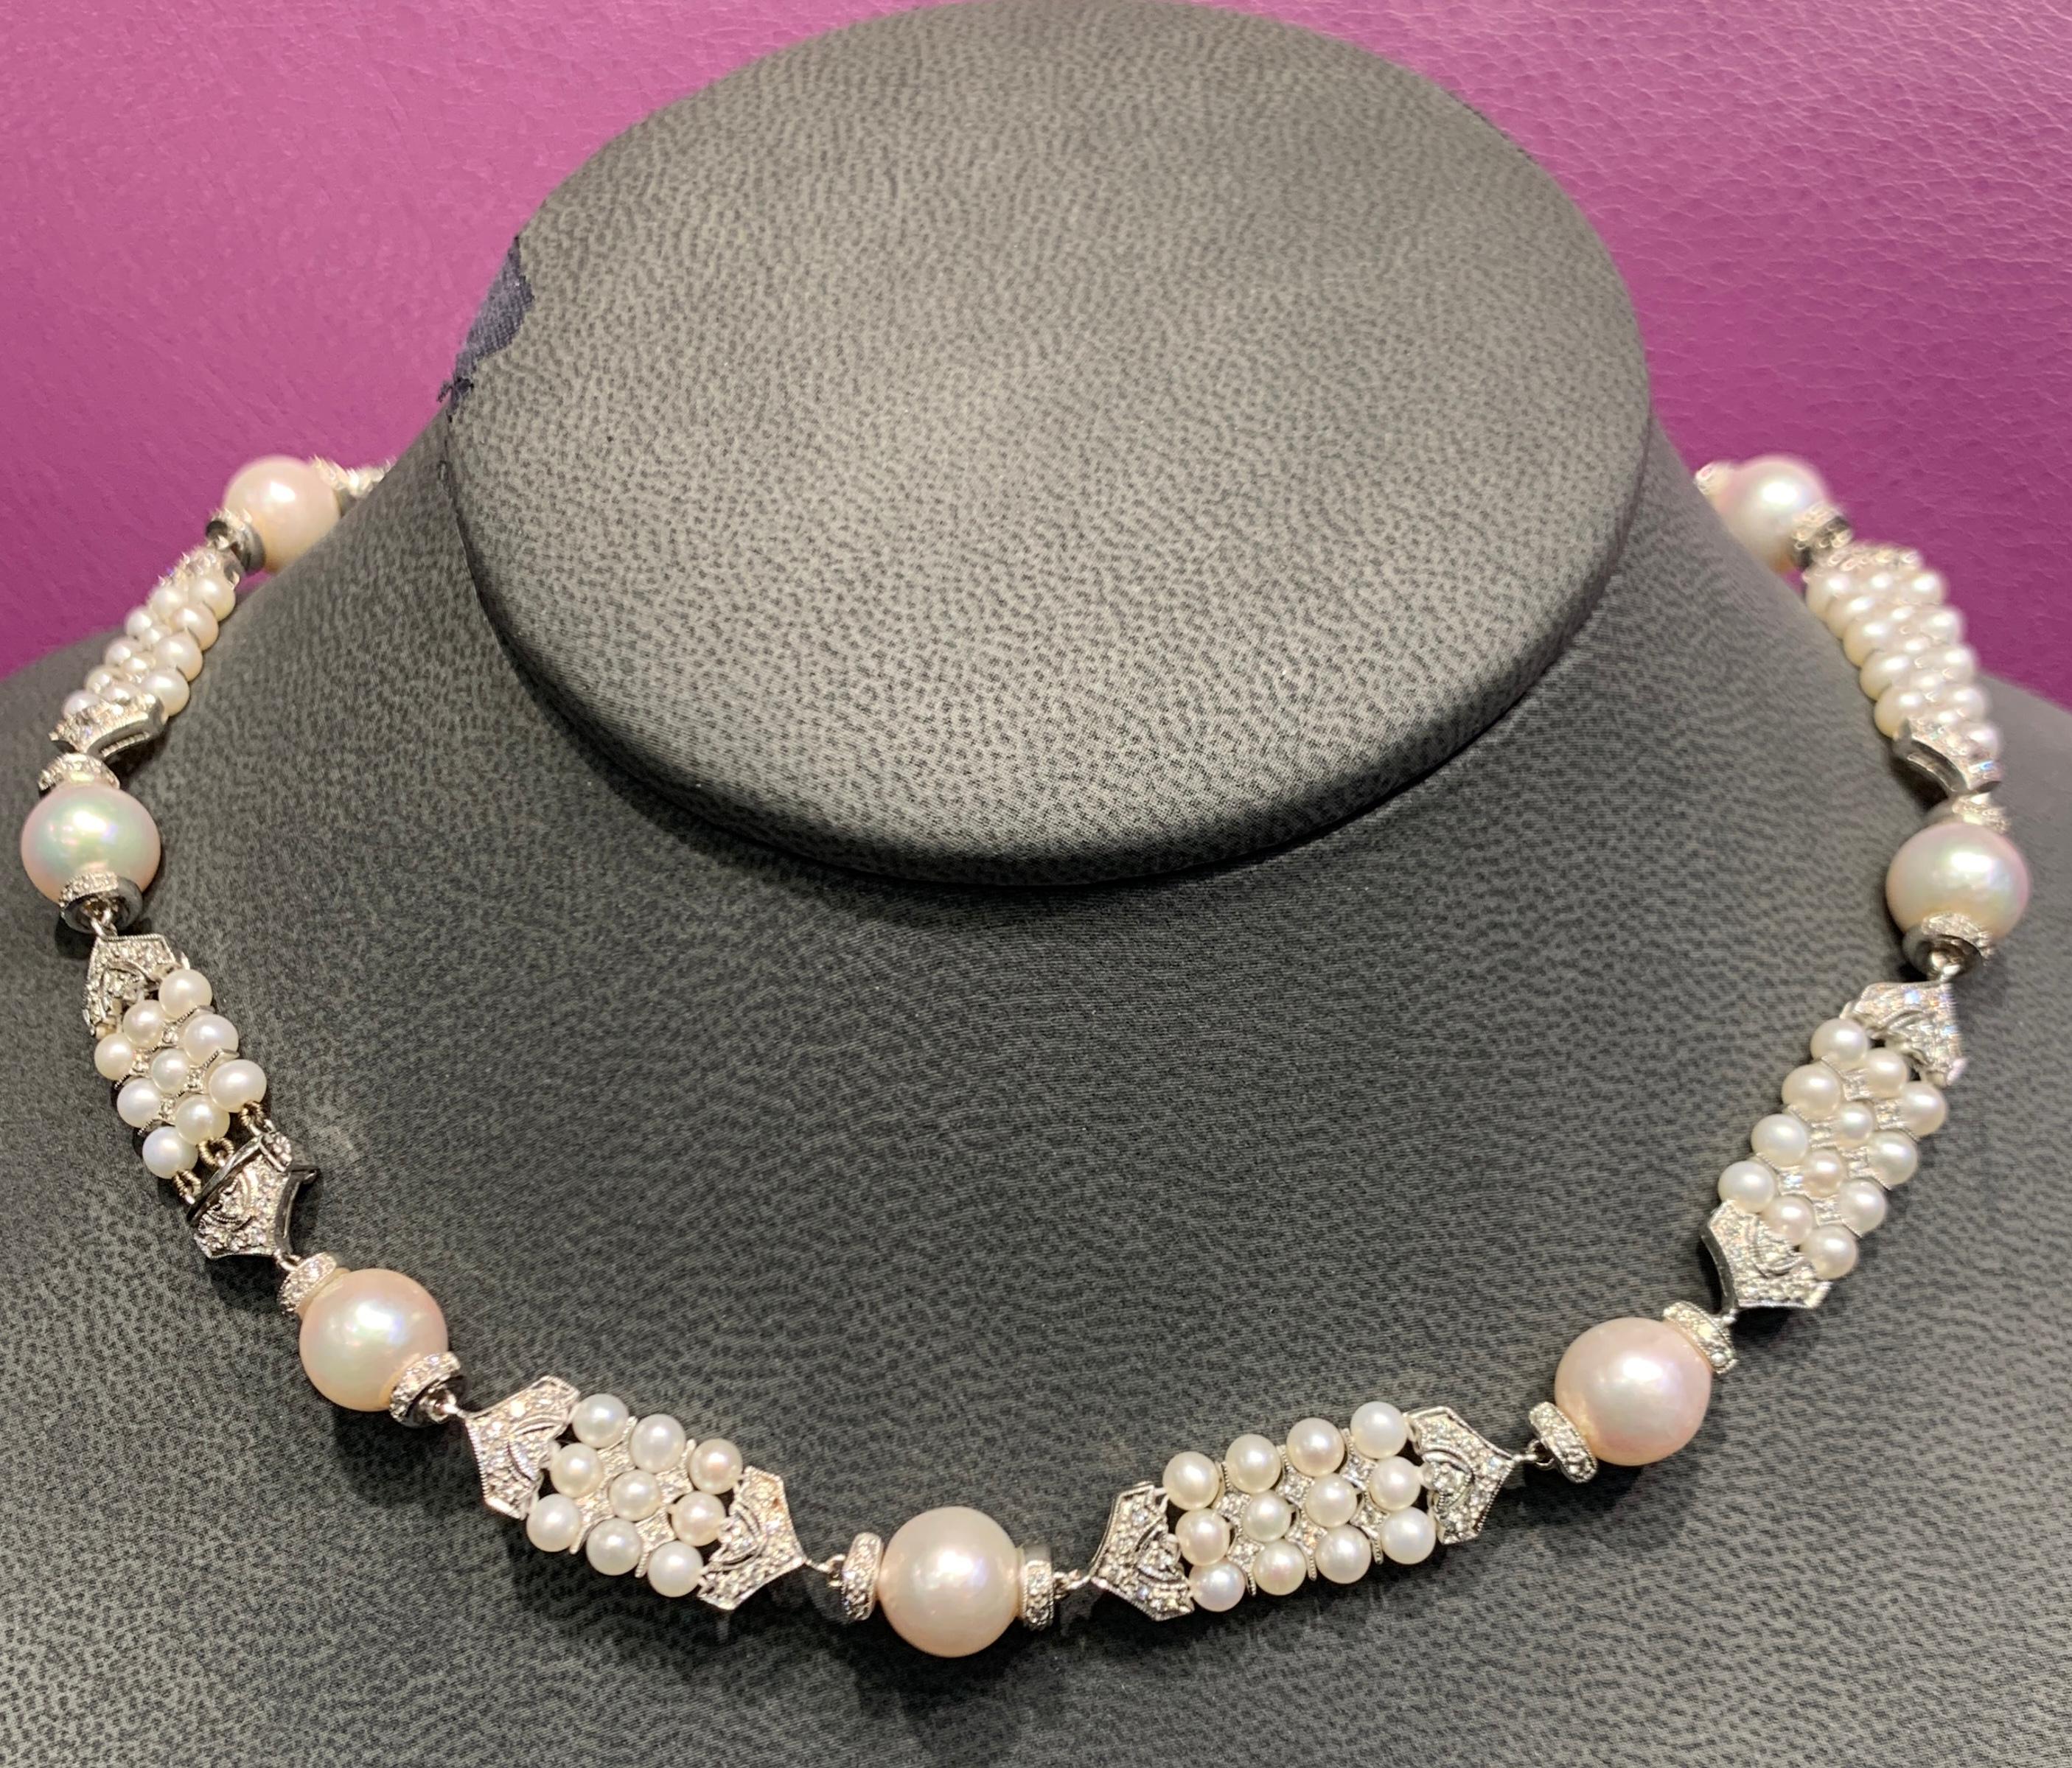 Pearl & Diamond Necklace, 18K White Gold 
9 Large Size Cultured Pearls 
111 Small Cultured Pearls
Diamond Weight: 2.26 Cts
Measurements: 16